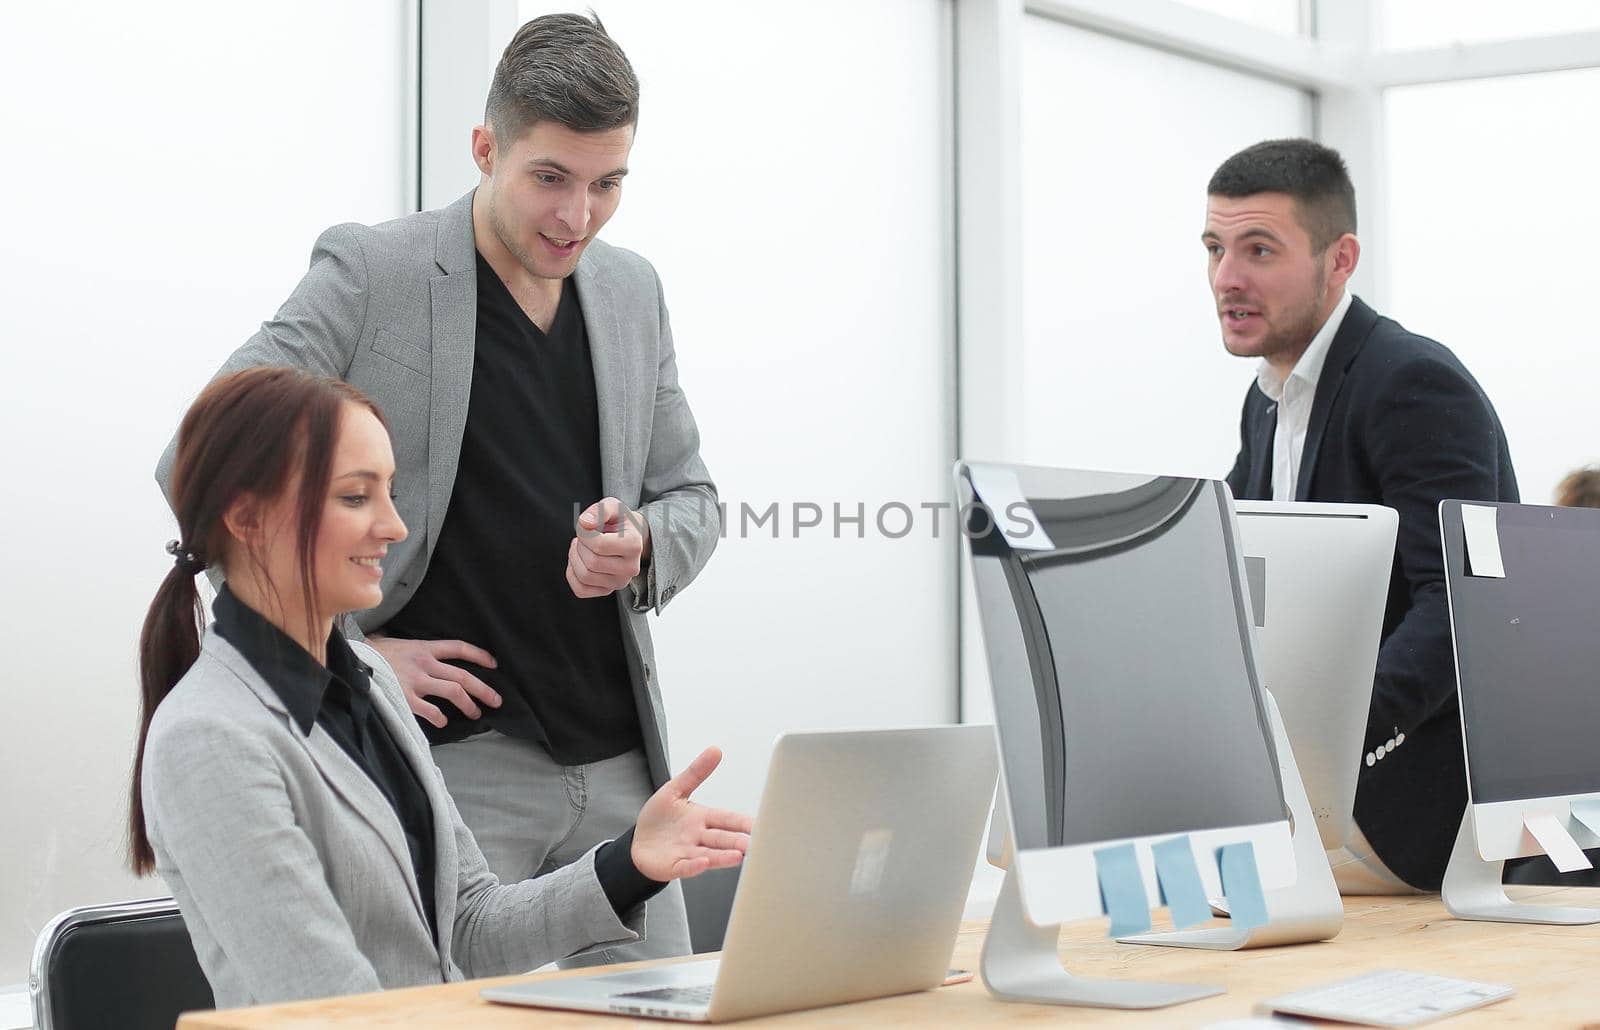 business team discussing work issues standing in the office . photo with a copy-space